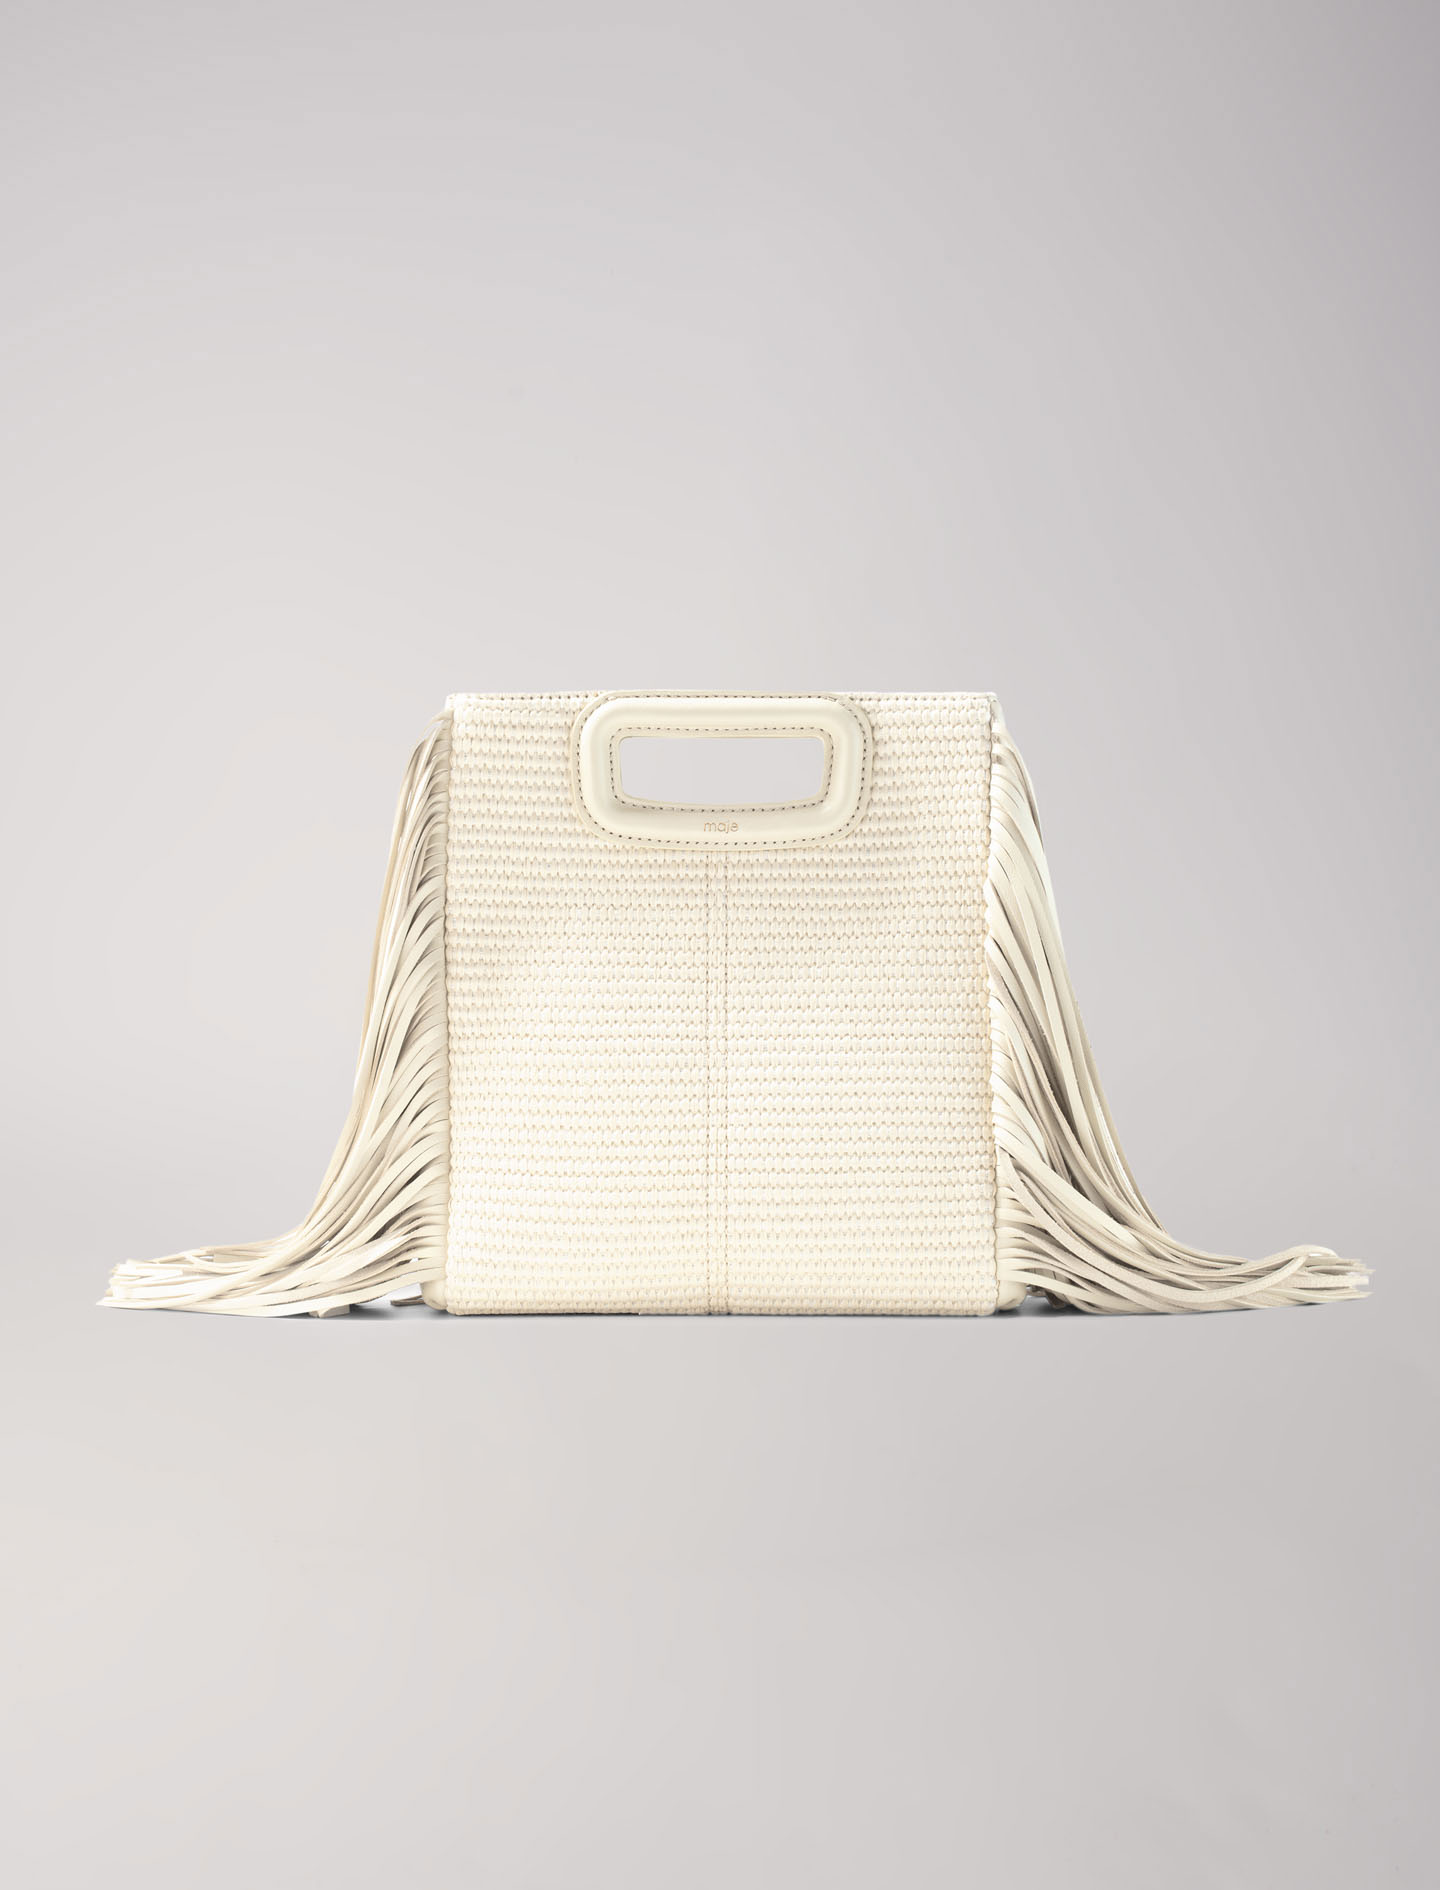 Mixte's polypropylene, Textile and raffia M bag for Spring/Summer, size Mixte-All Bags-OS (ONE SIZE), in color Beige / Beige